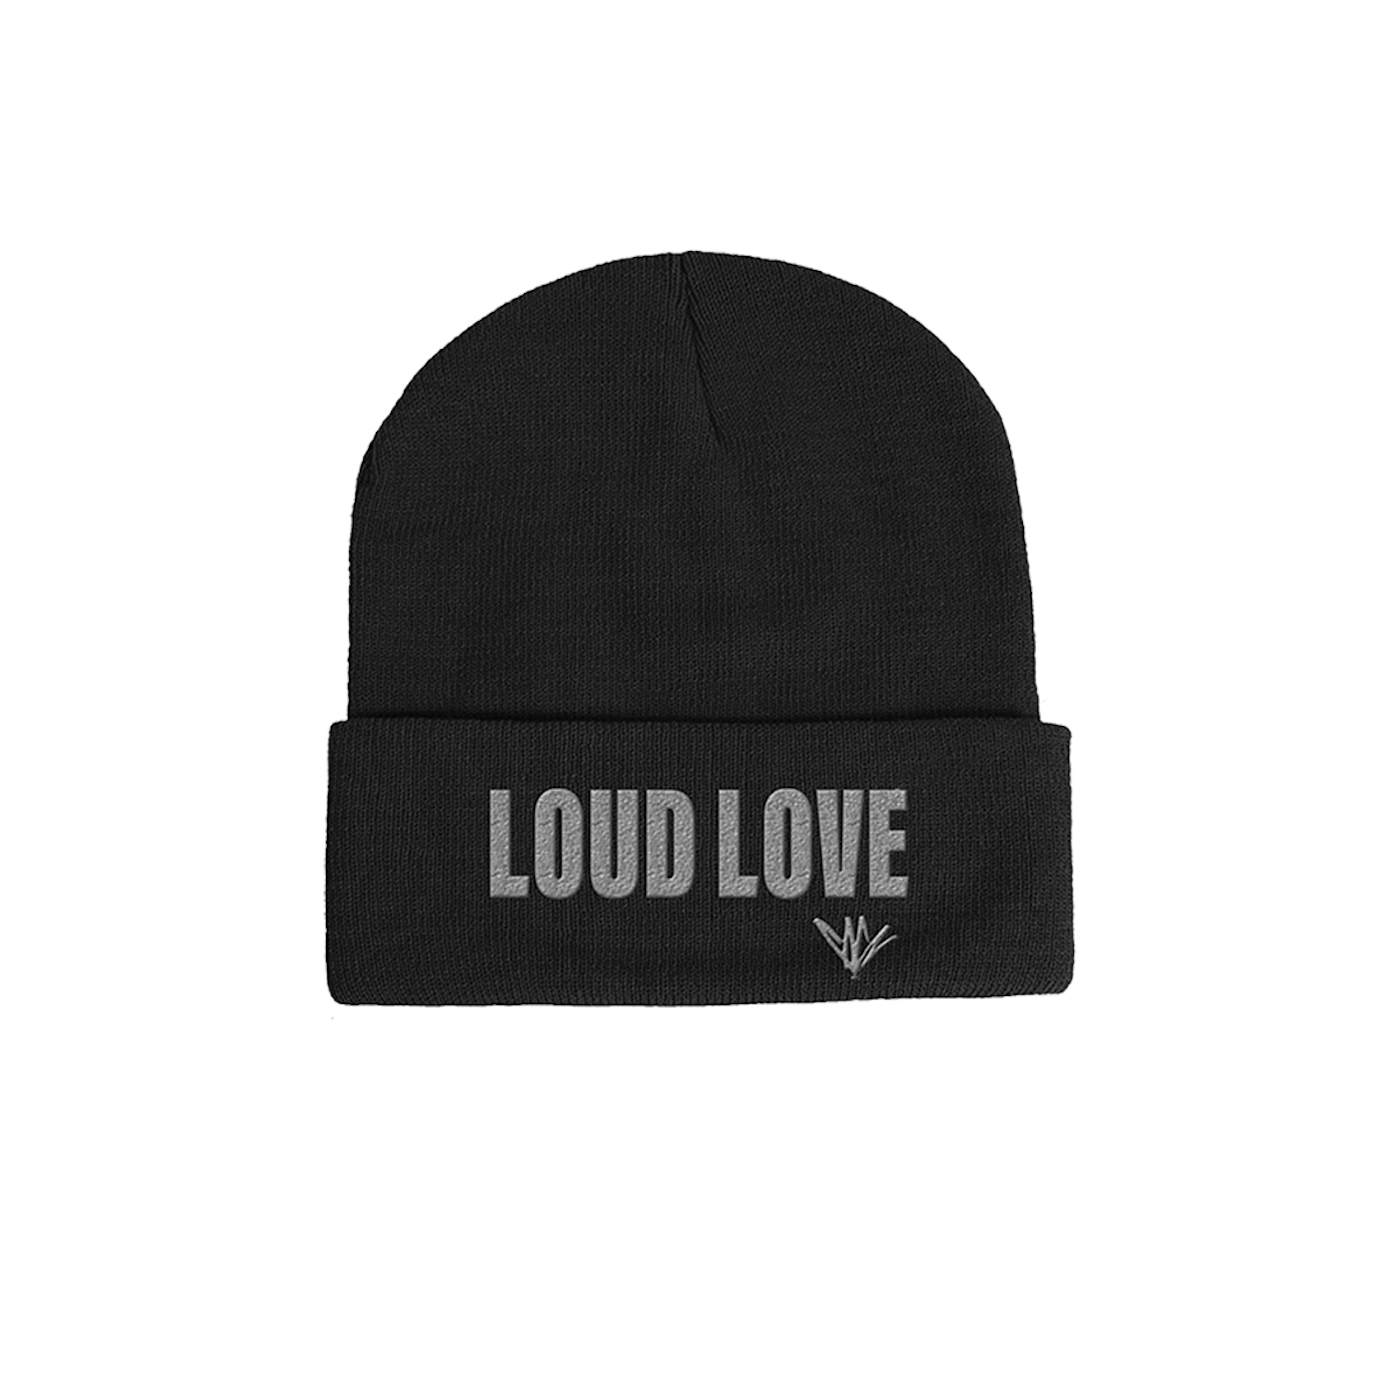 Chris Cornell Loud Love Embroidered Beanie